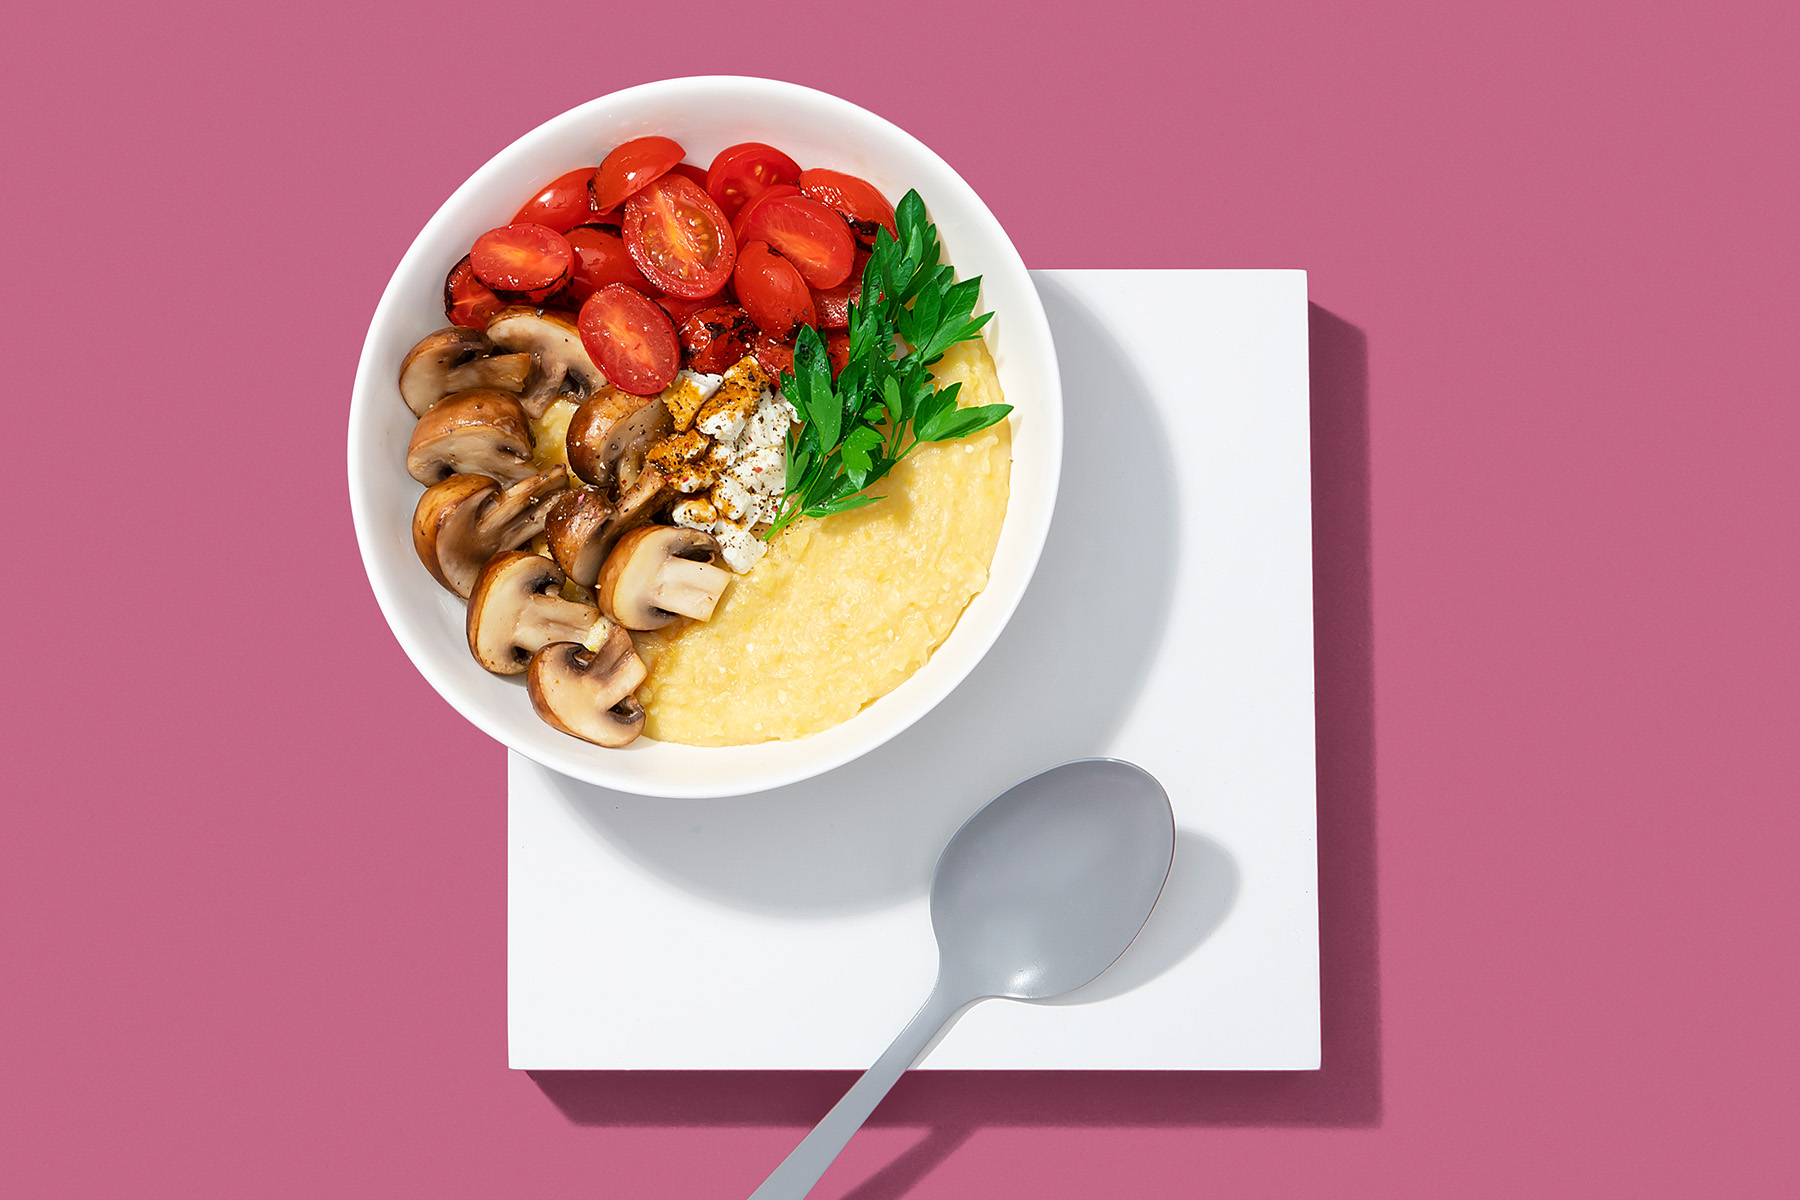 bowl of polenta with roasted mushrooms, tomatoes, and goat cheese